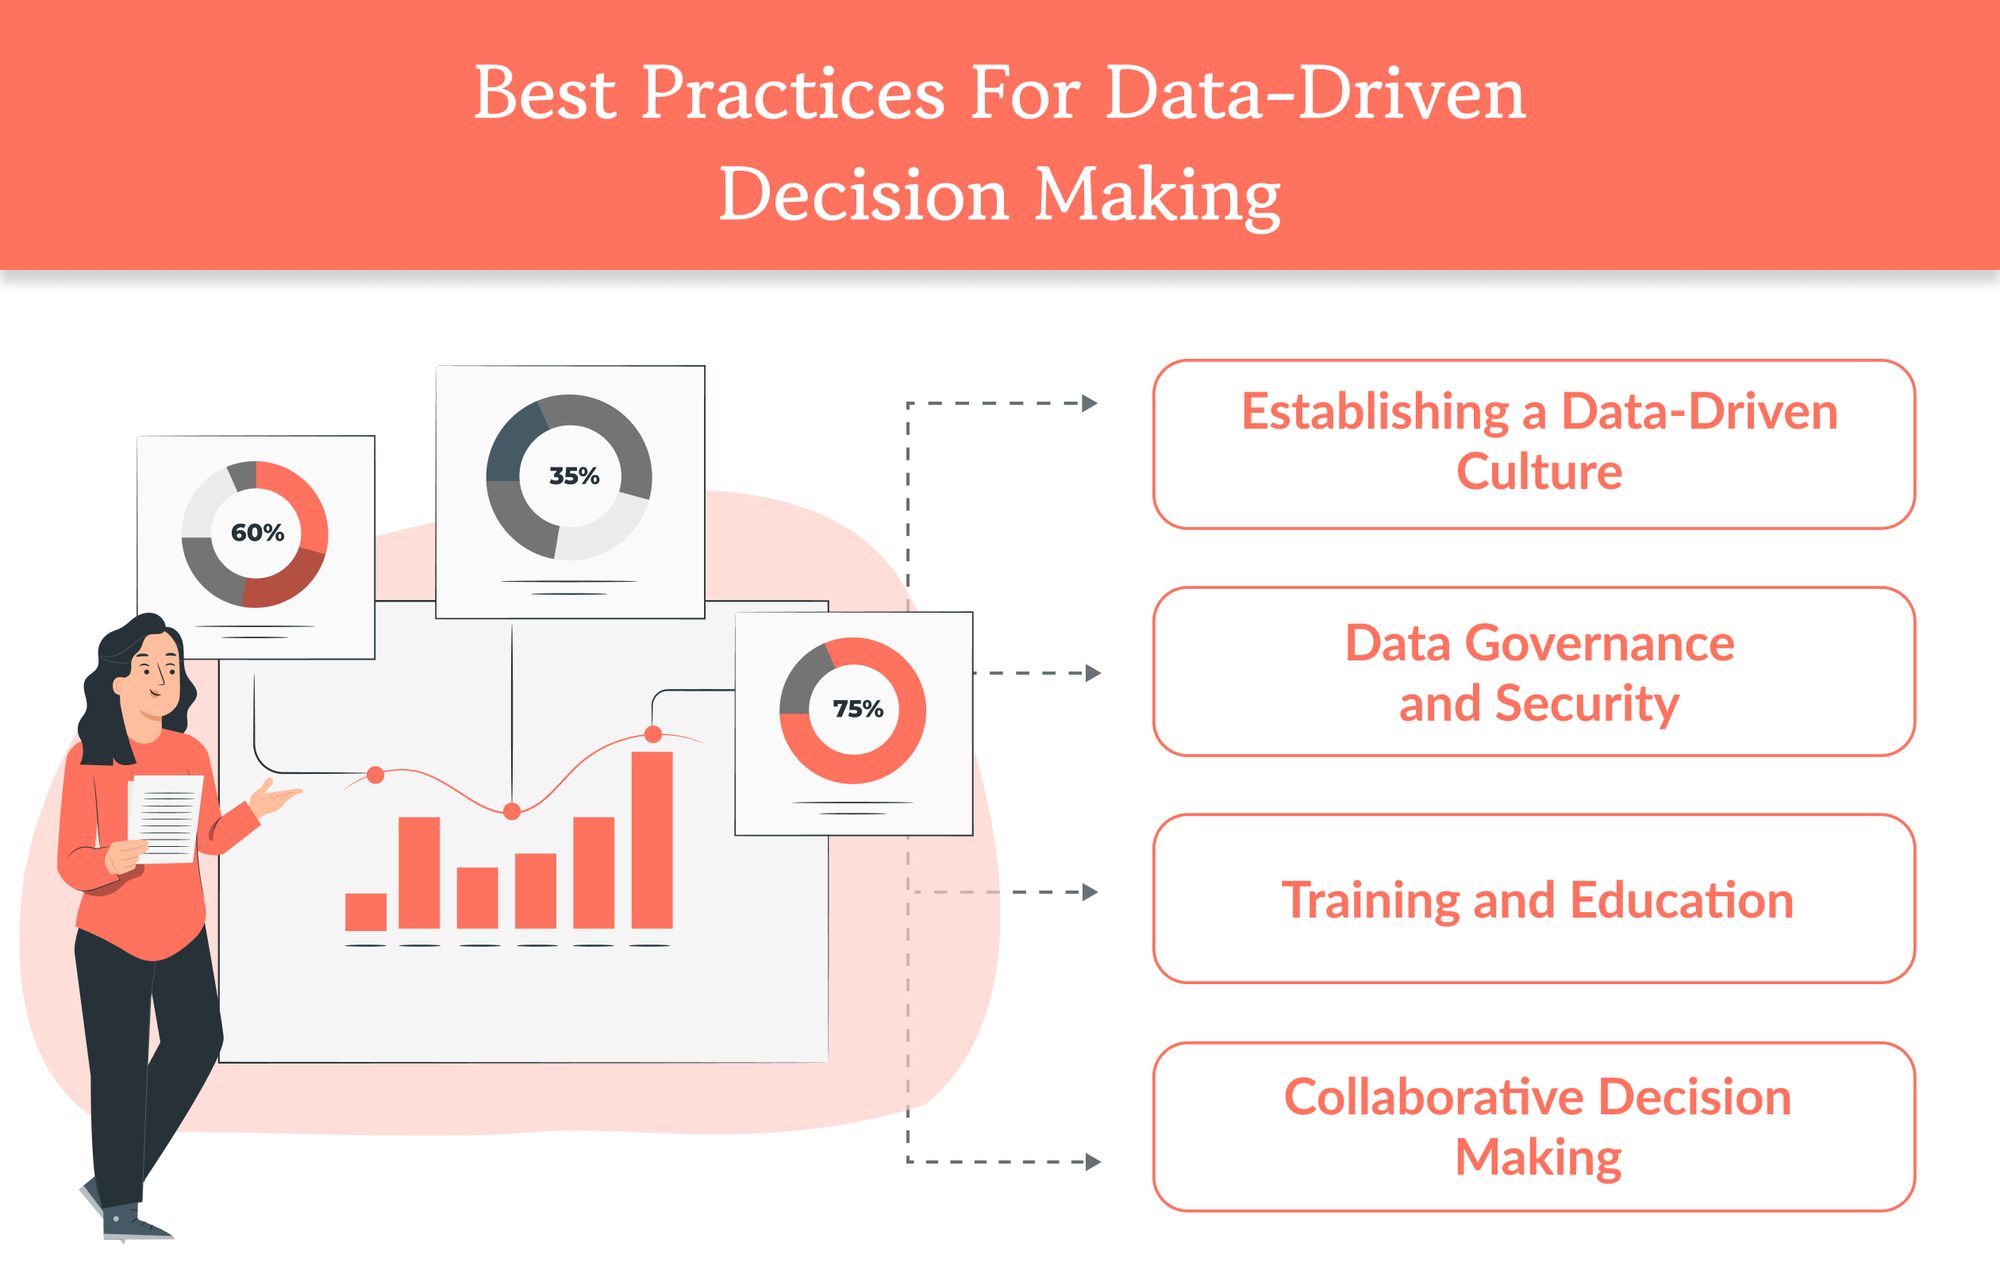 Best Practices for Data-Driven Decision Making